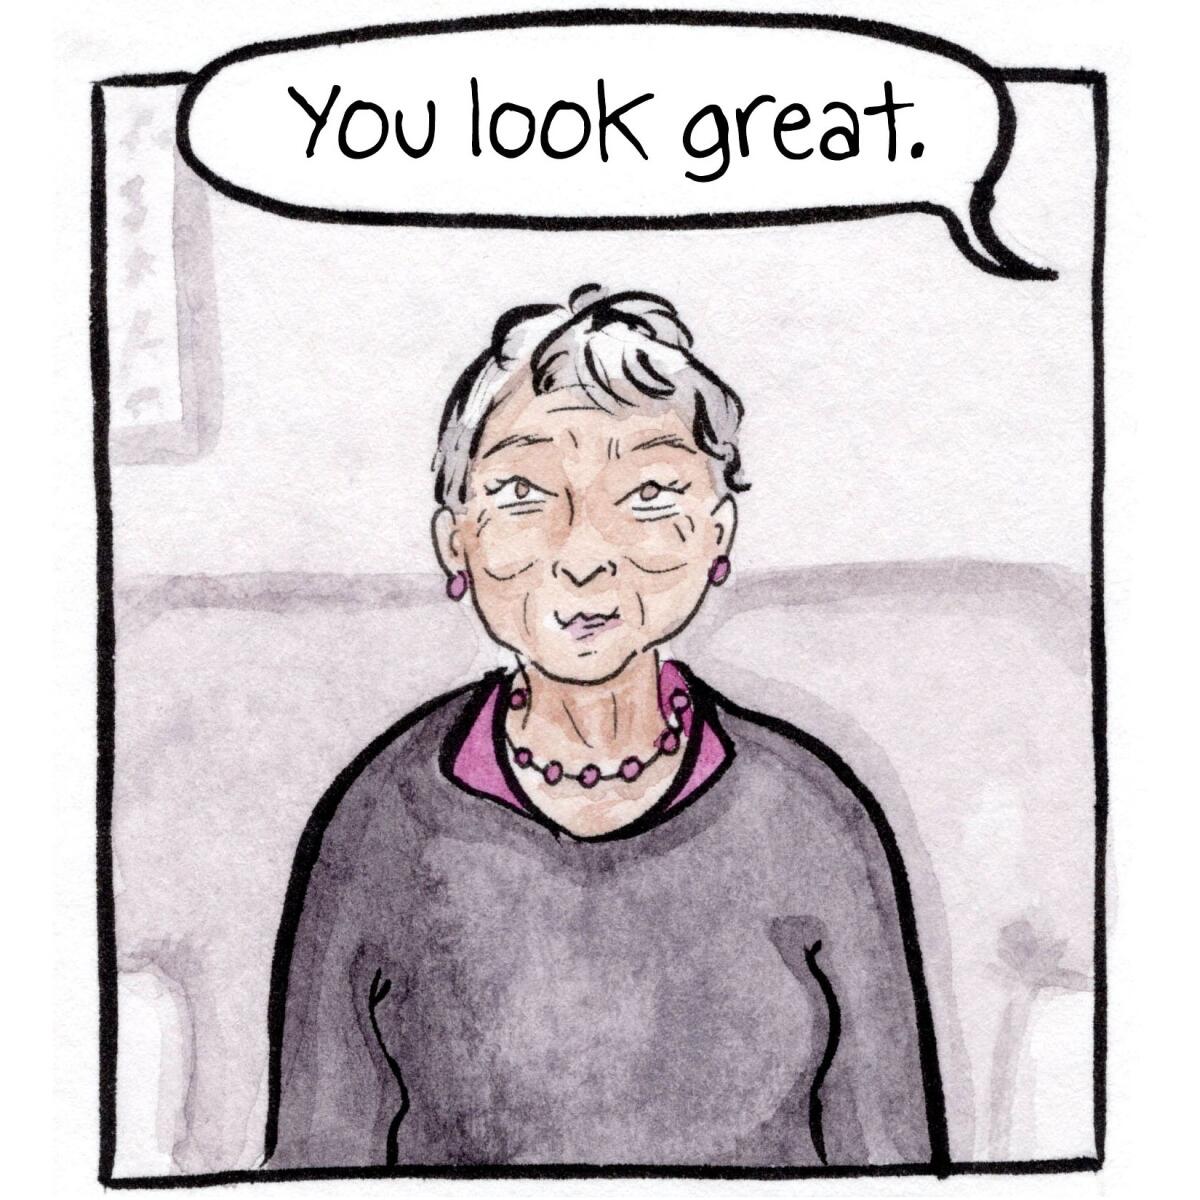 Someone says, "You look great," to an older woman in a sweater with short gray hair.